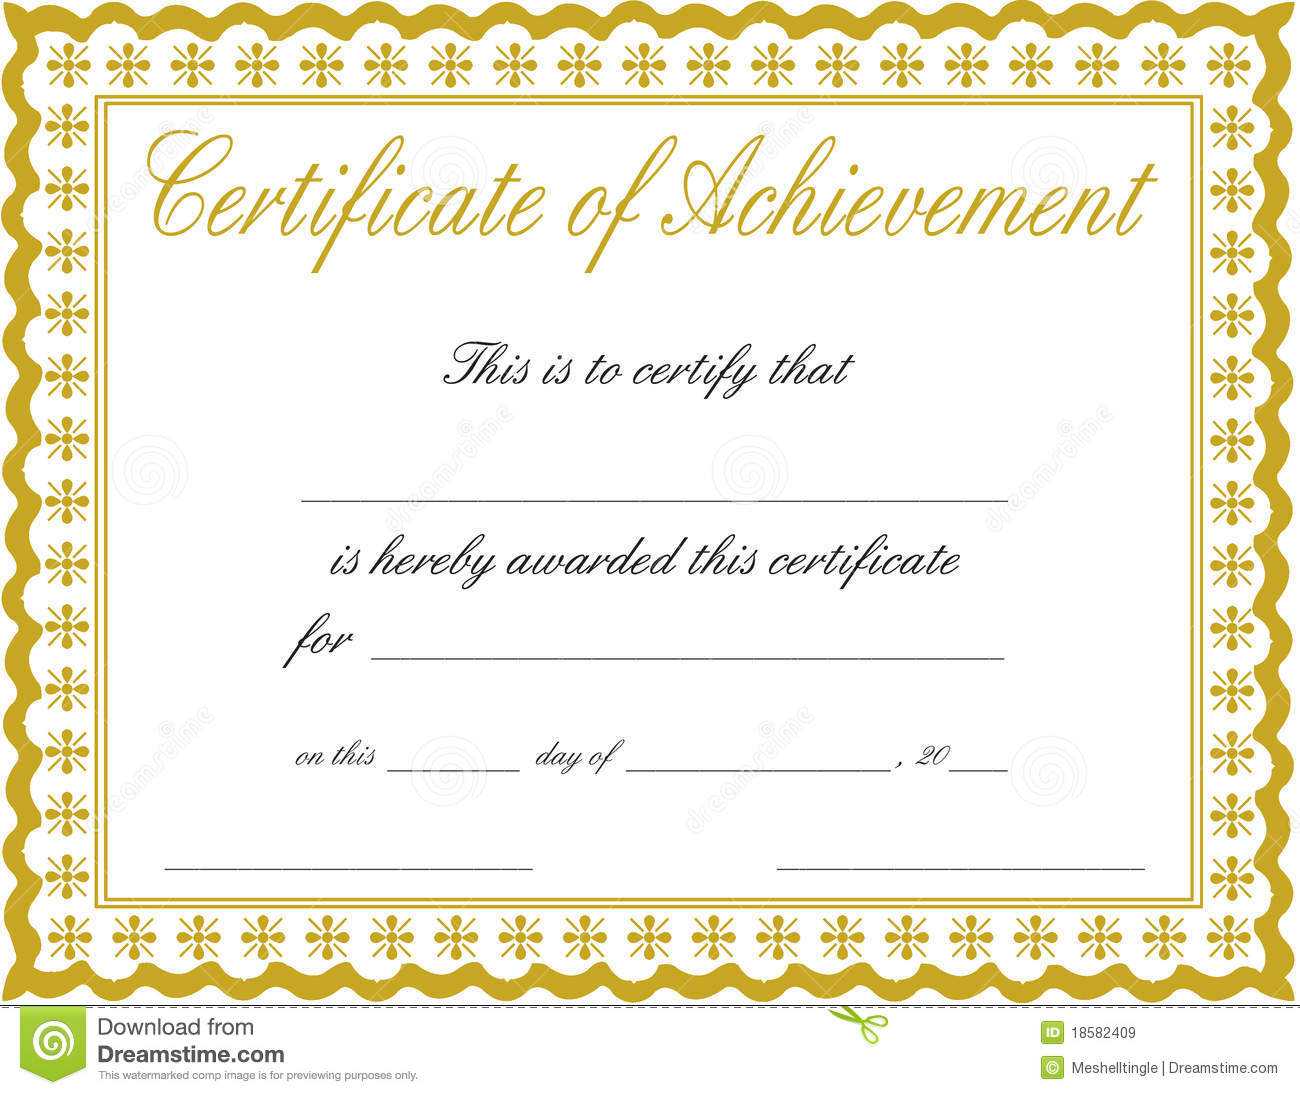 Free Printable Certificate Of Achievement Template | Mult Inside Free Printable Certificate Of Achievement Template